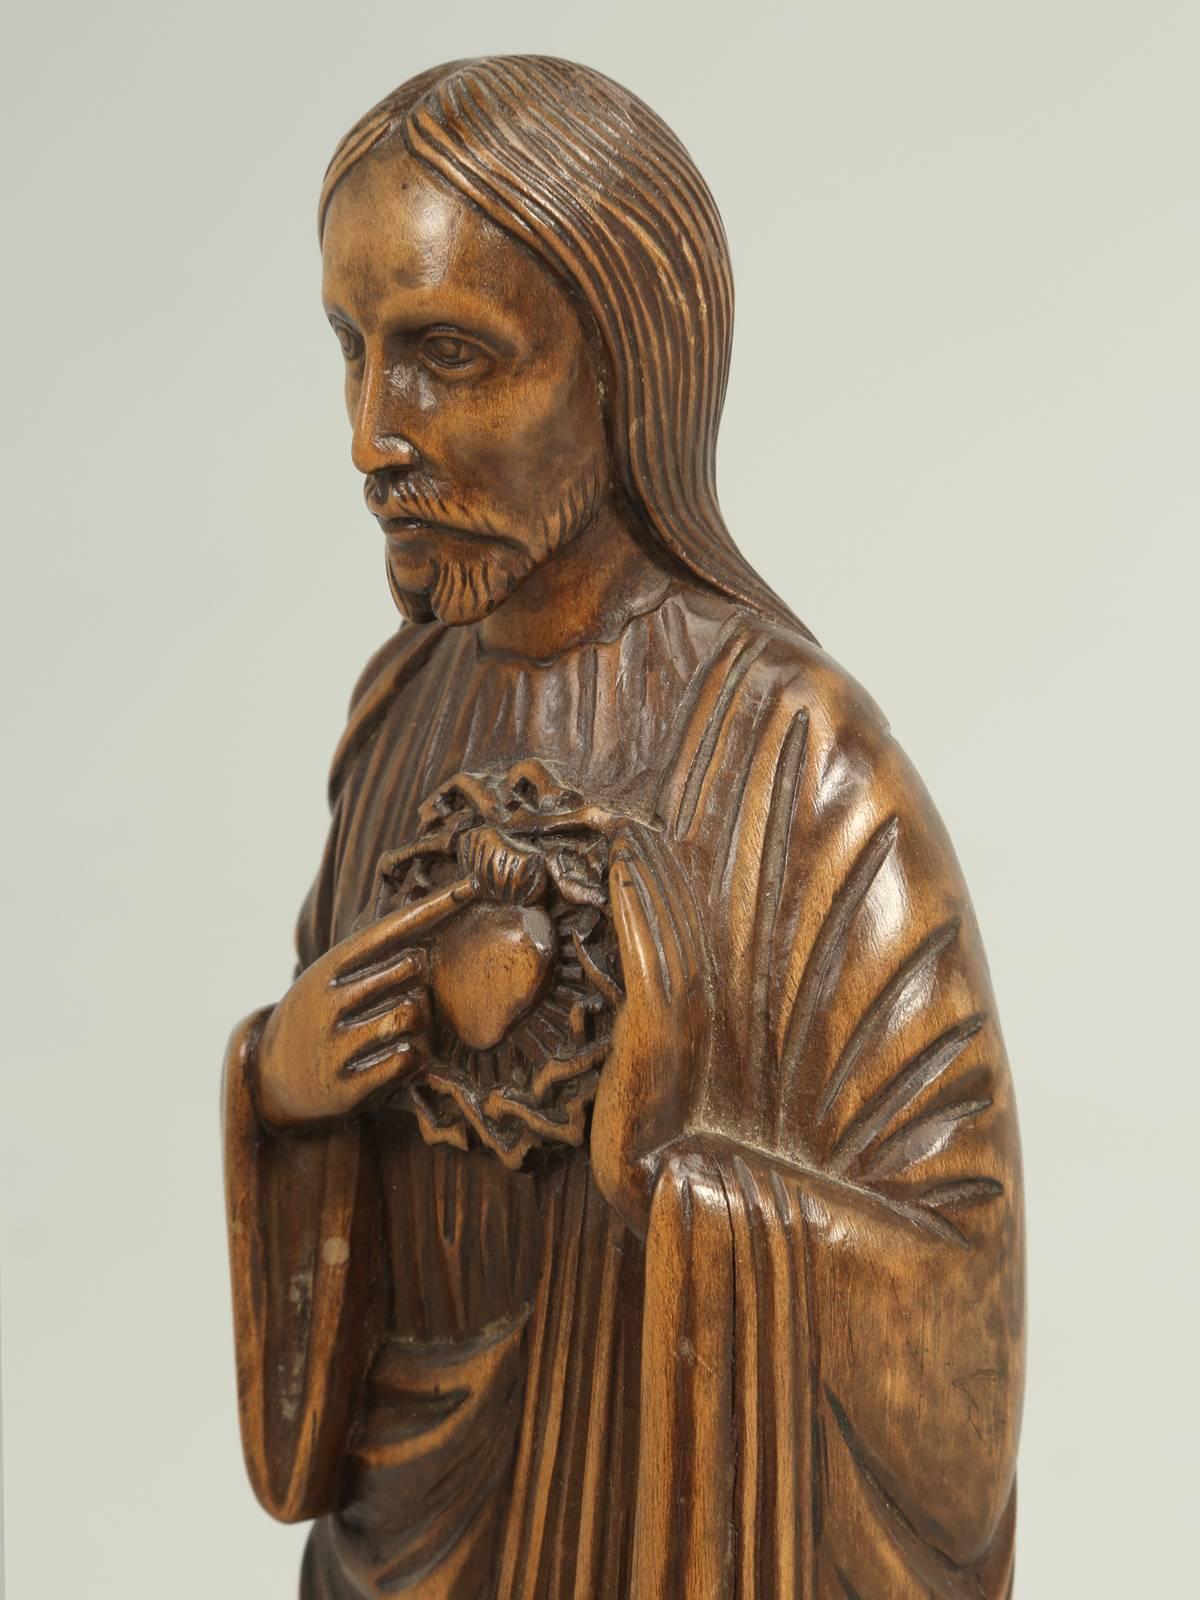 Mid-20th Century Wood Carving by the French Sculptor R. Vergnes, circa 1949